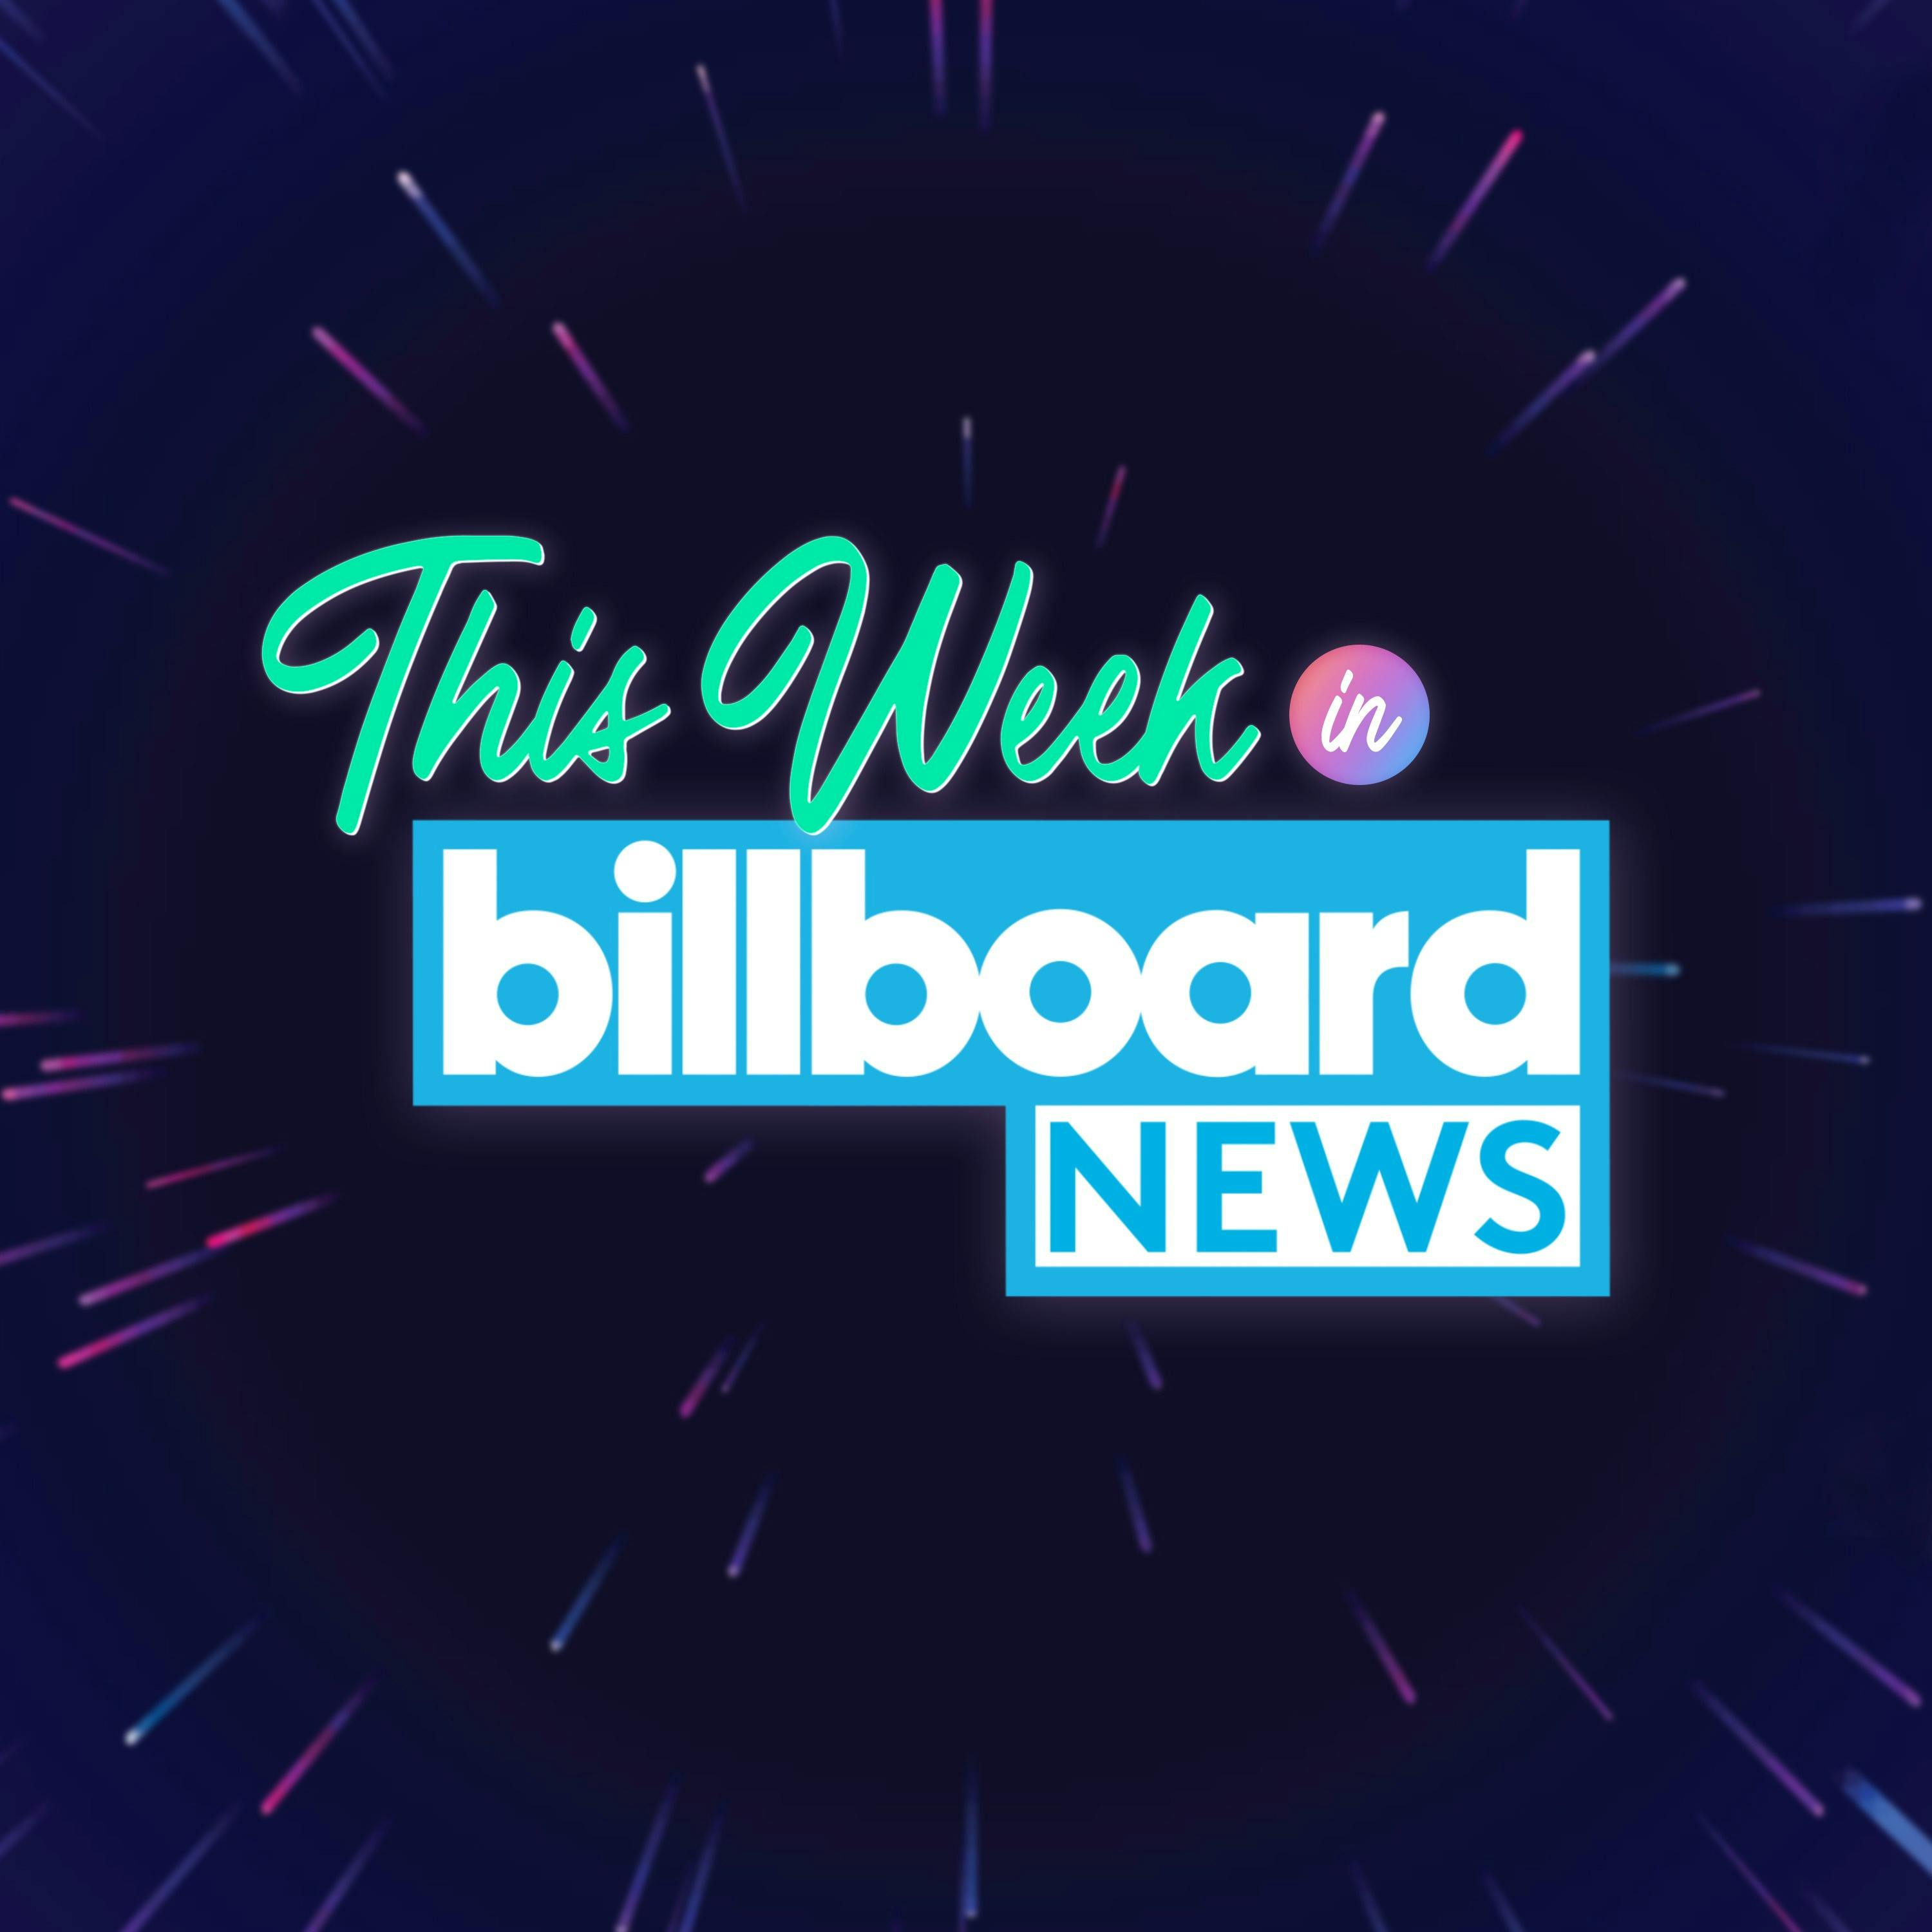 Selena Gomez Discusses Finding Peace With ‘Rare’ & More: This Week In Billboard News (1/17/20)